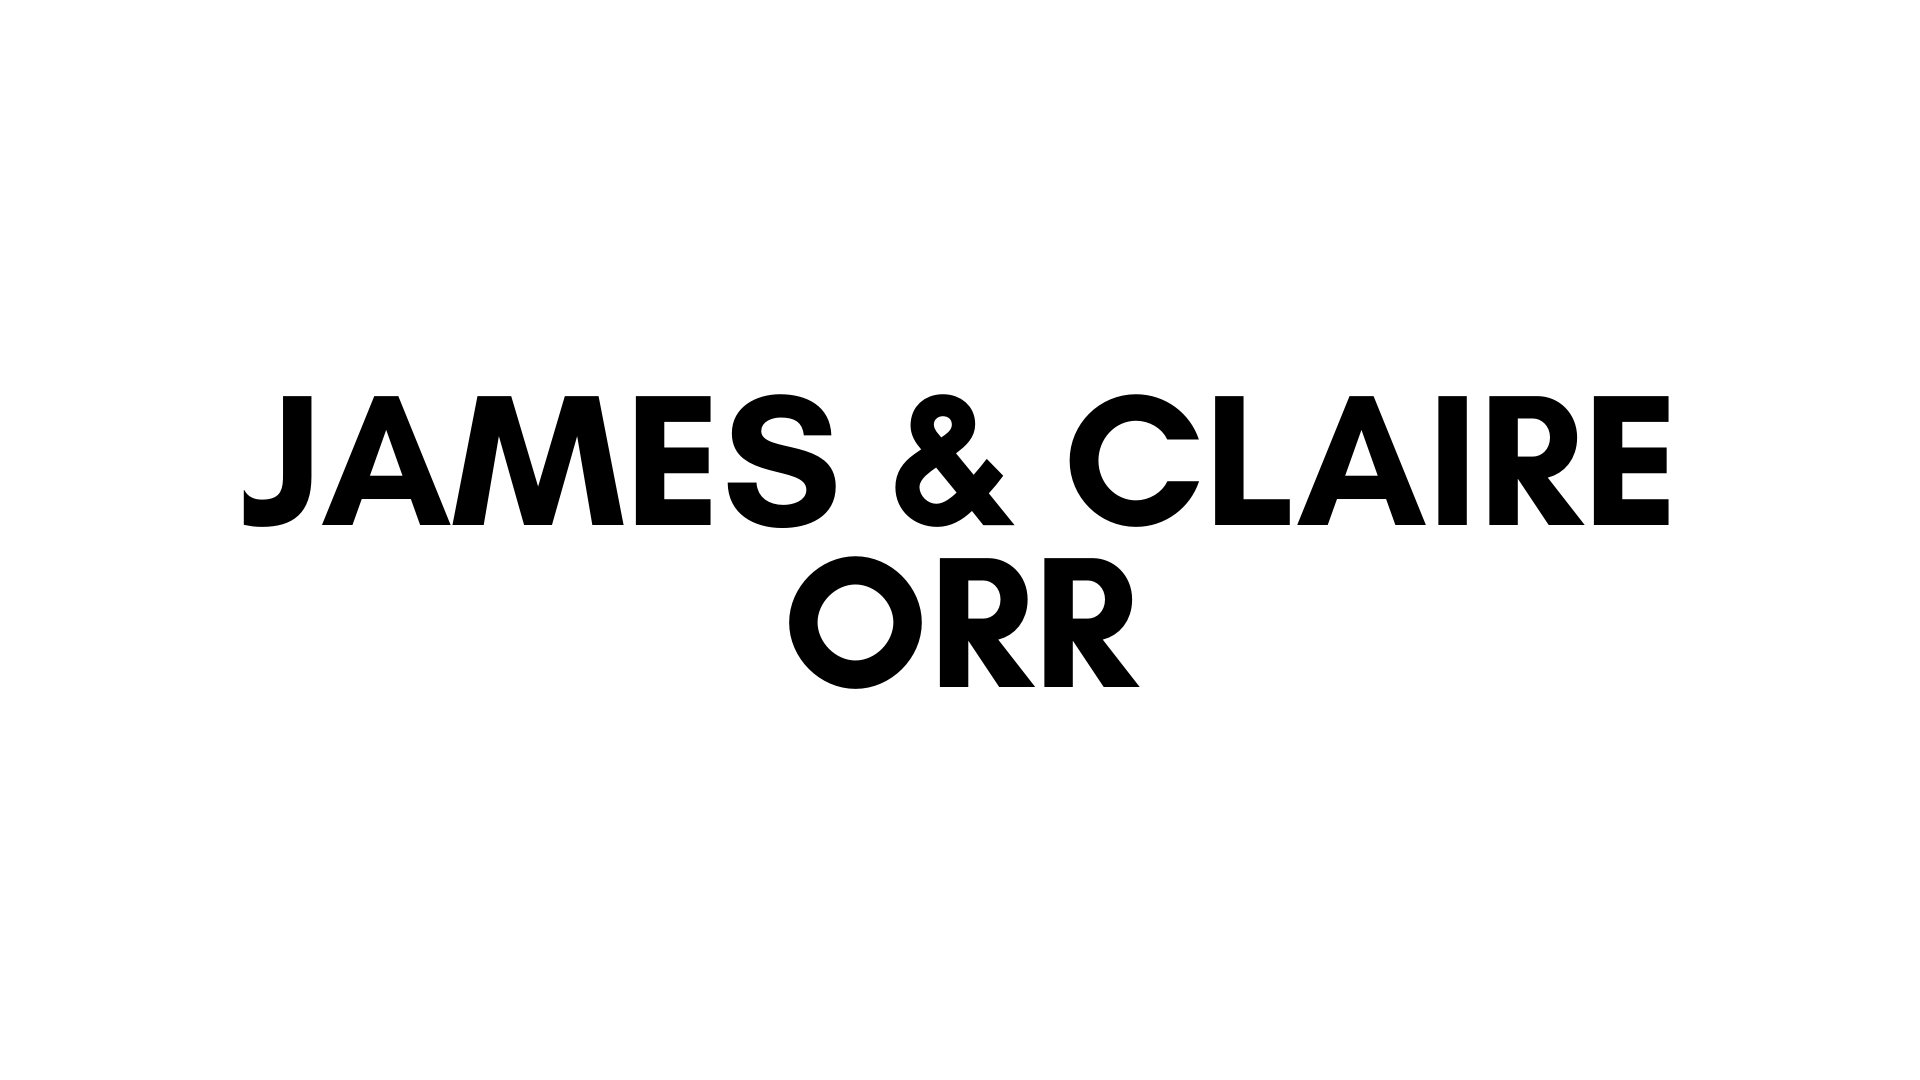 JAMES AND CLAIRE ORR